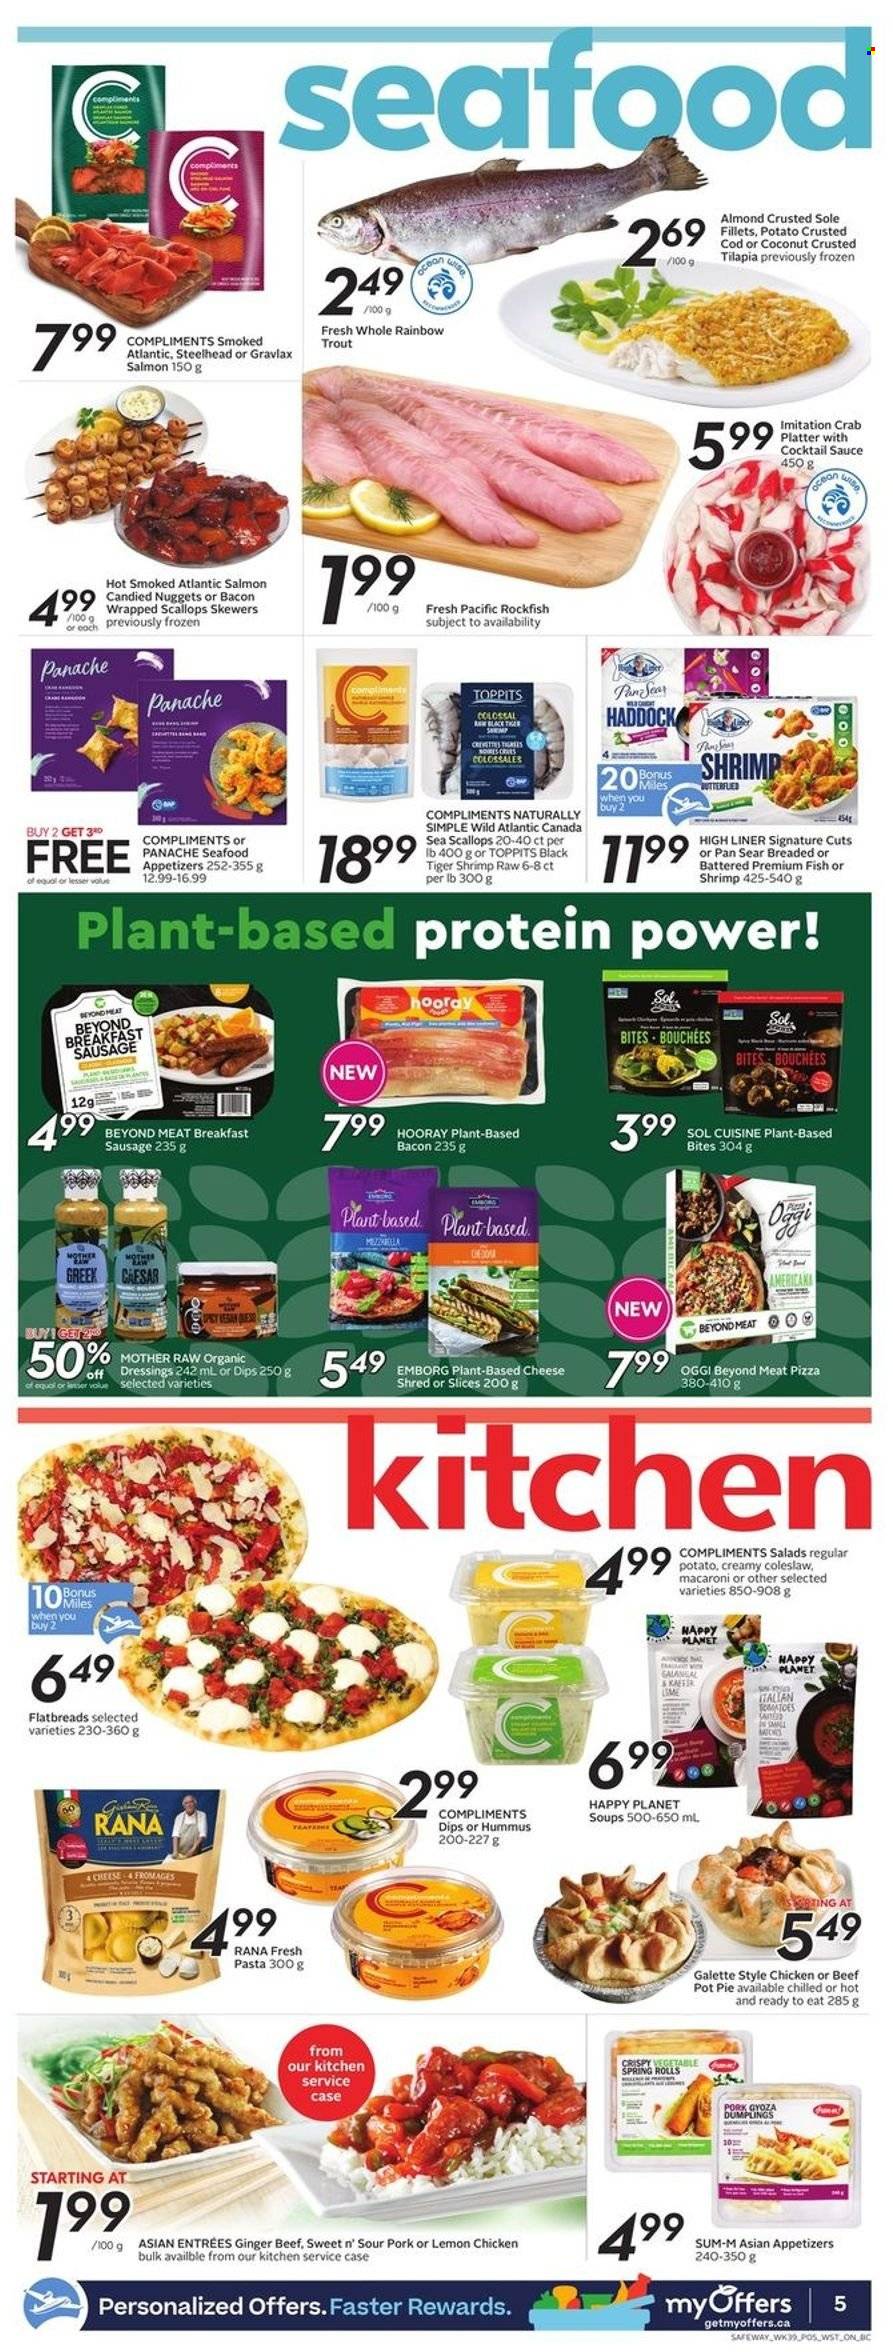 thumbnail - Safeway Flyer - January 20, 2022 - January 26, 2022 - Sales products - pie, pot pie, ginger, bacon wrapped scallops, cod, rockfish, salmon, scallops, tilapia, trout, haddock, seafood, crab, fish, shrimps, coleslaw, pizza, macaroni, nuggets, sauce, dumplings, spring rolls, Rana, bacon, sausage, hummus, cocktail sauce, Sol, nappies, pot. Page 6.